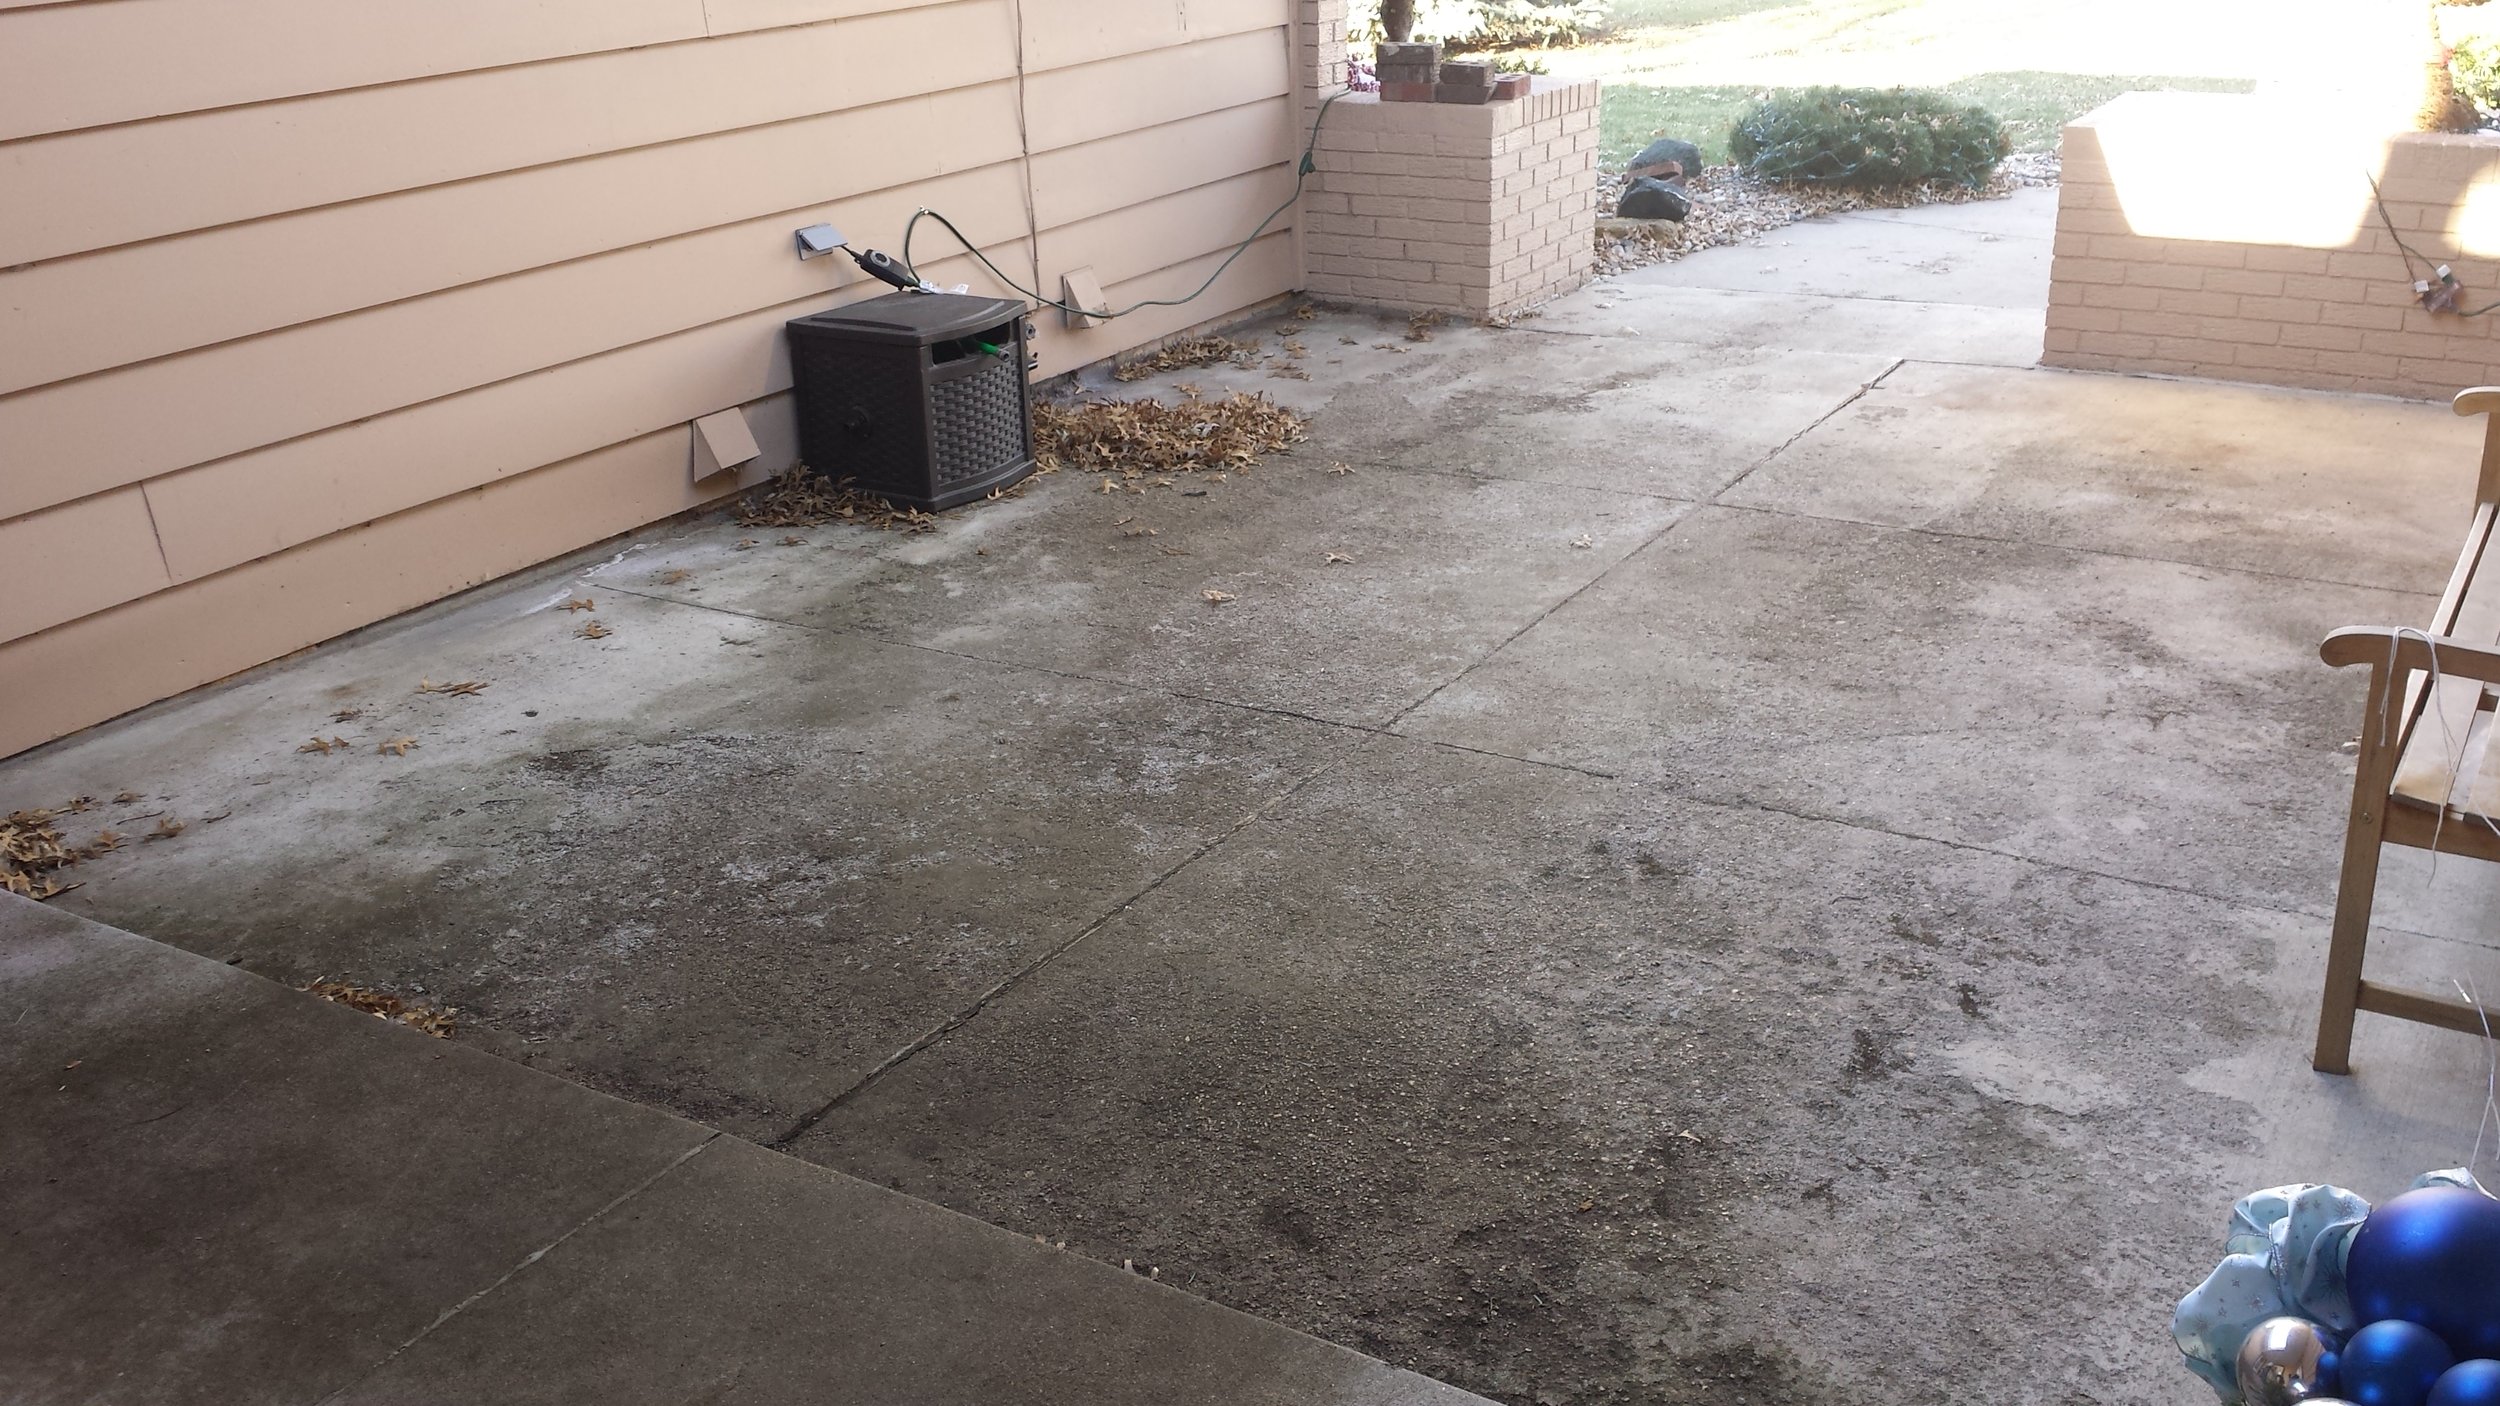 Badly deteriorated patio not draining